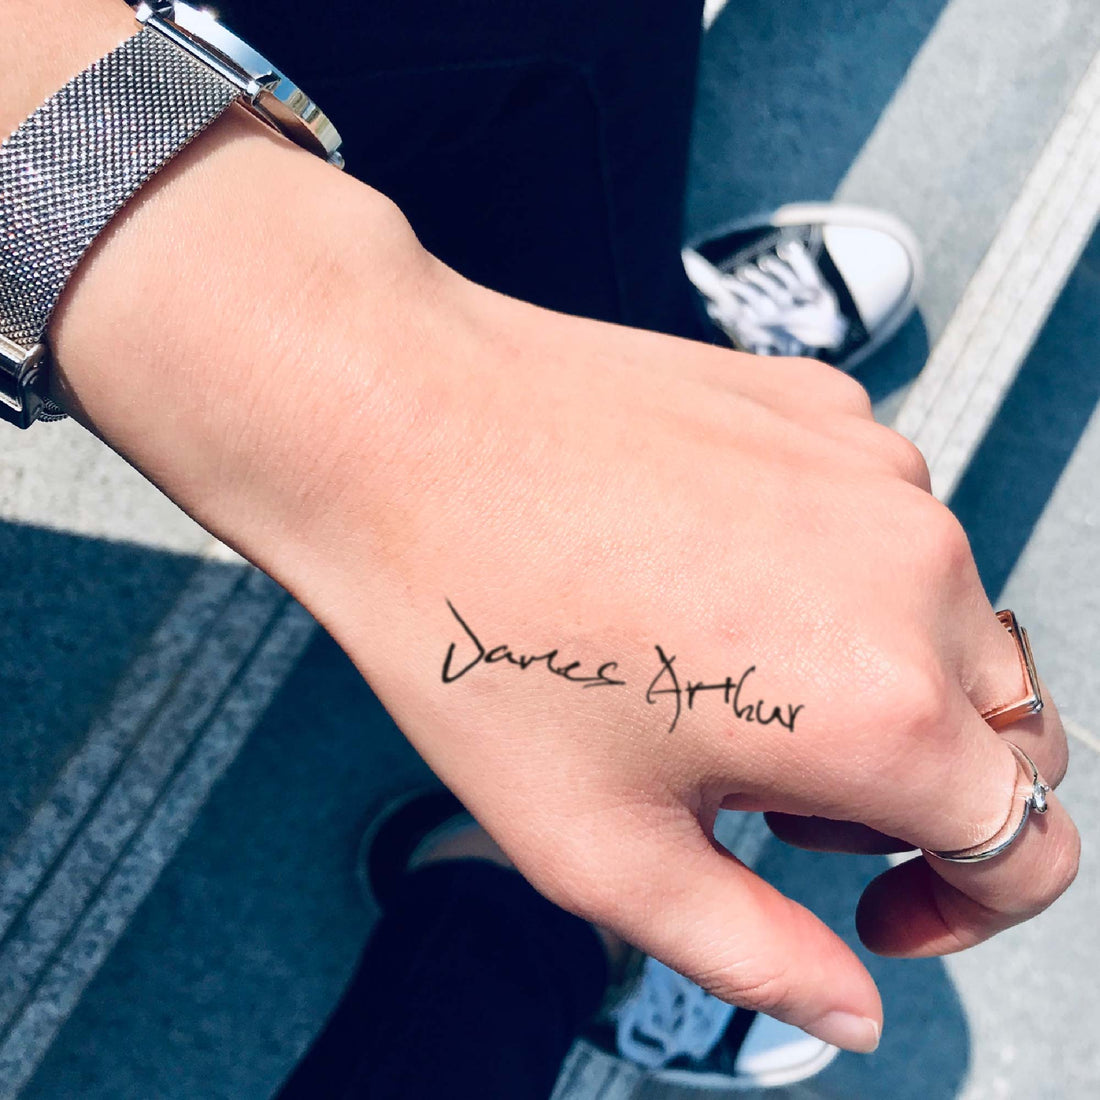 James Arthur custom temporary tattoo sticker design idea inspiration meanings removal arm wrist hand words font name signature calligraphy lyrics tour concert outfits merch accessory gift souvenir costumes wear dress up code